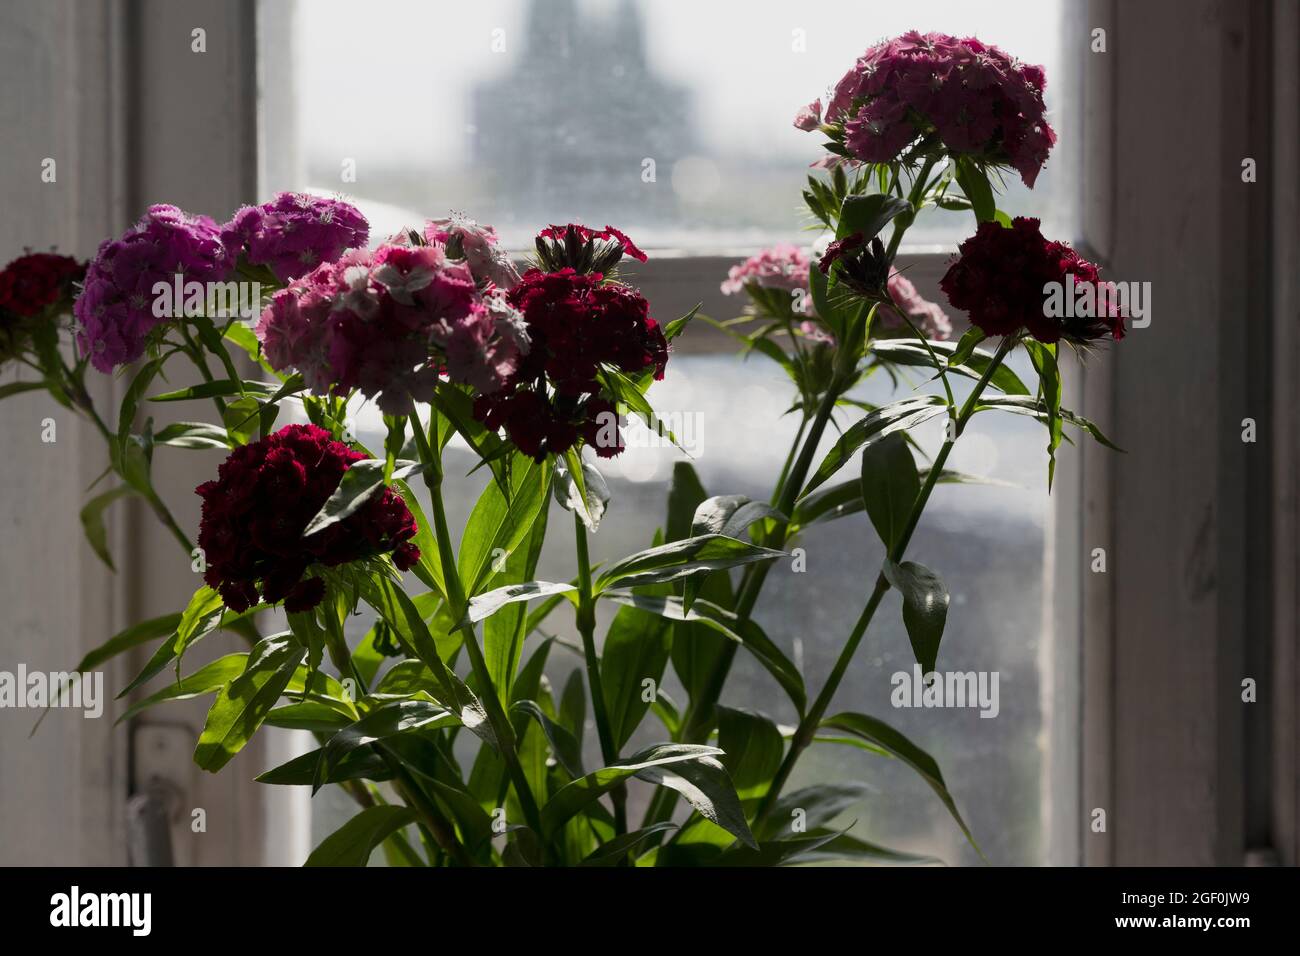 Defocused sweet williams flowers bouquet in blurred window background. Close up Stock Photo